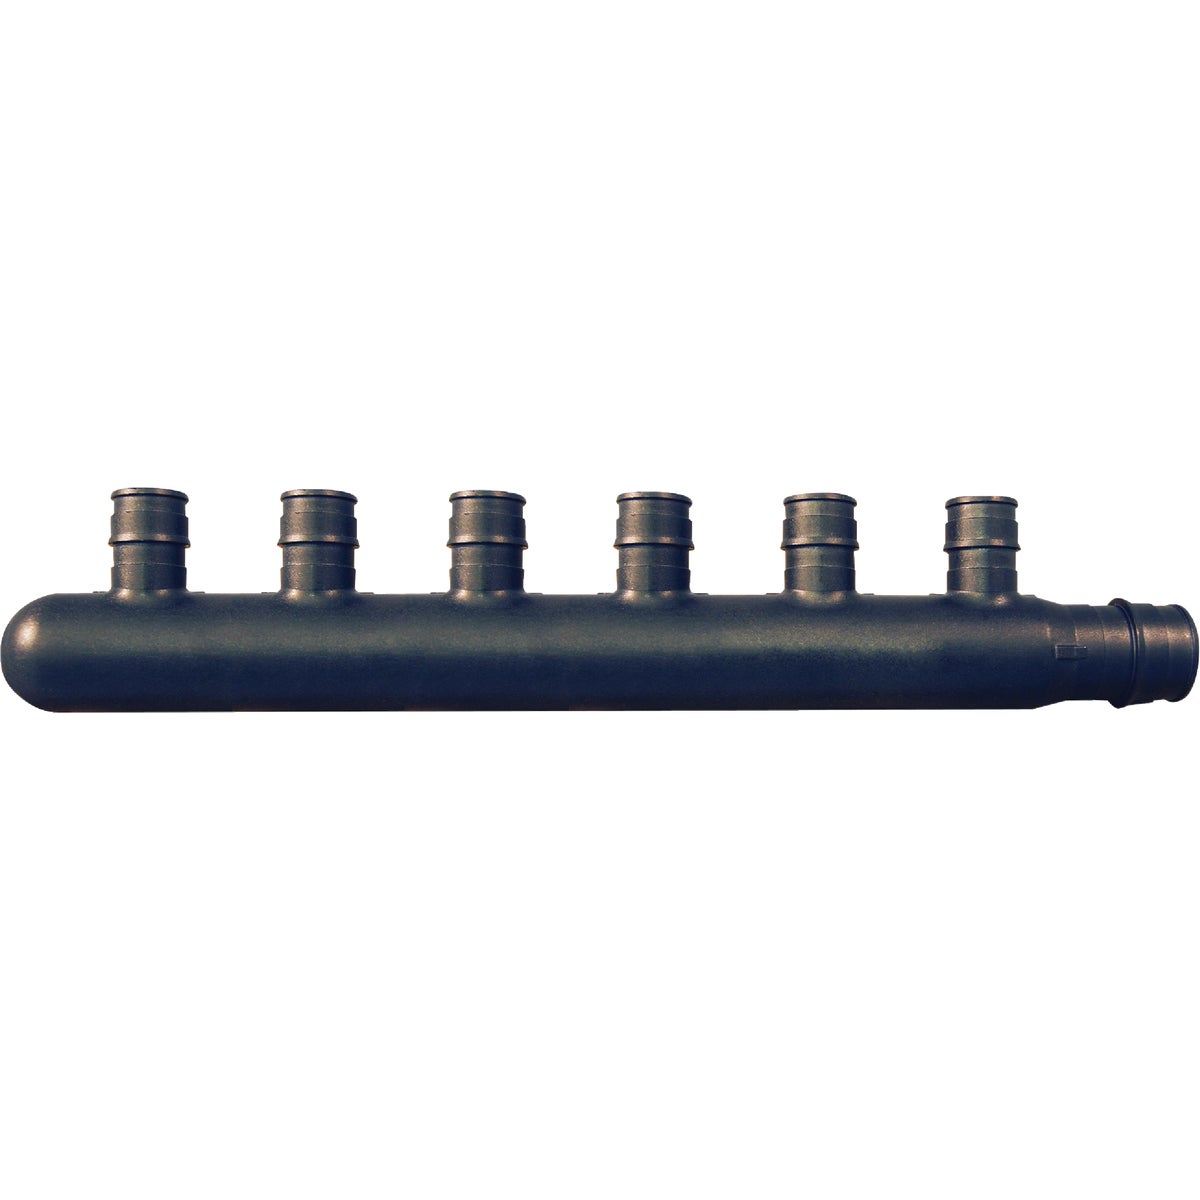 Apollo Retail PEX - Poly Alloy Manifold Type A 3/4 In. x 6, 1/2 In. Outlets